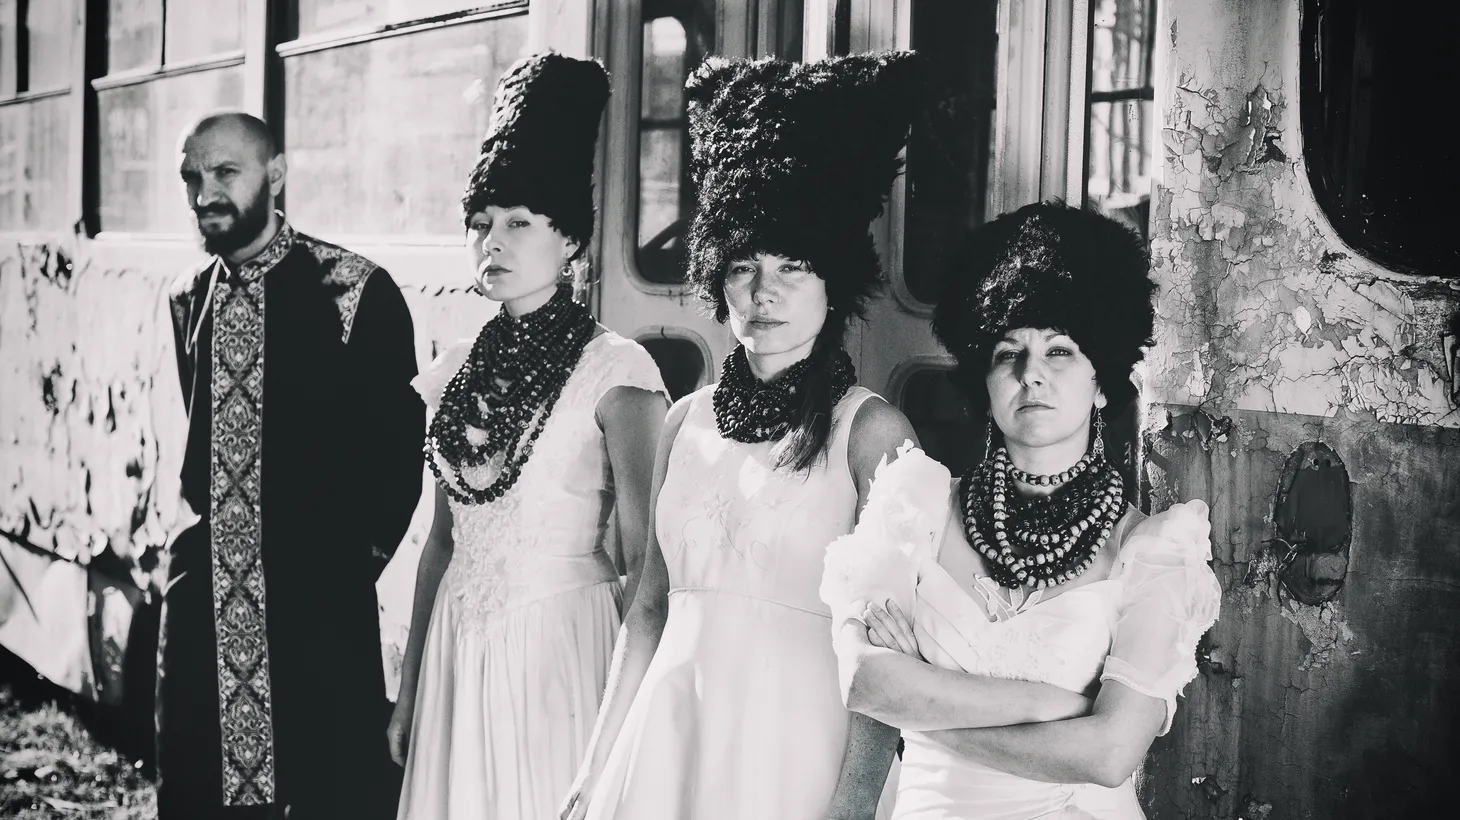 The Ukrainian band DakhaBrakha is touring the U.S. while their country continues to face the brutality of Russia’s invasion. The band is using their shows to raise money for Ukrainians stuck in the chaos.